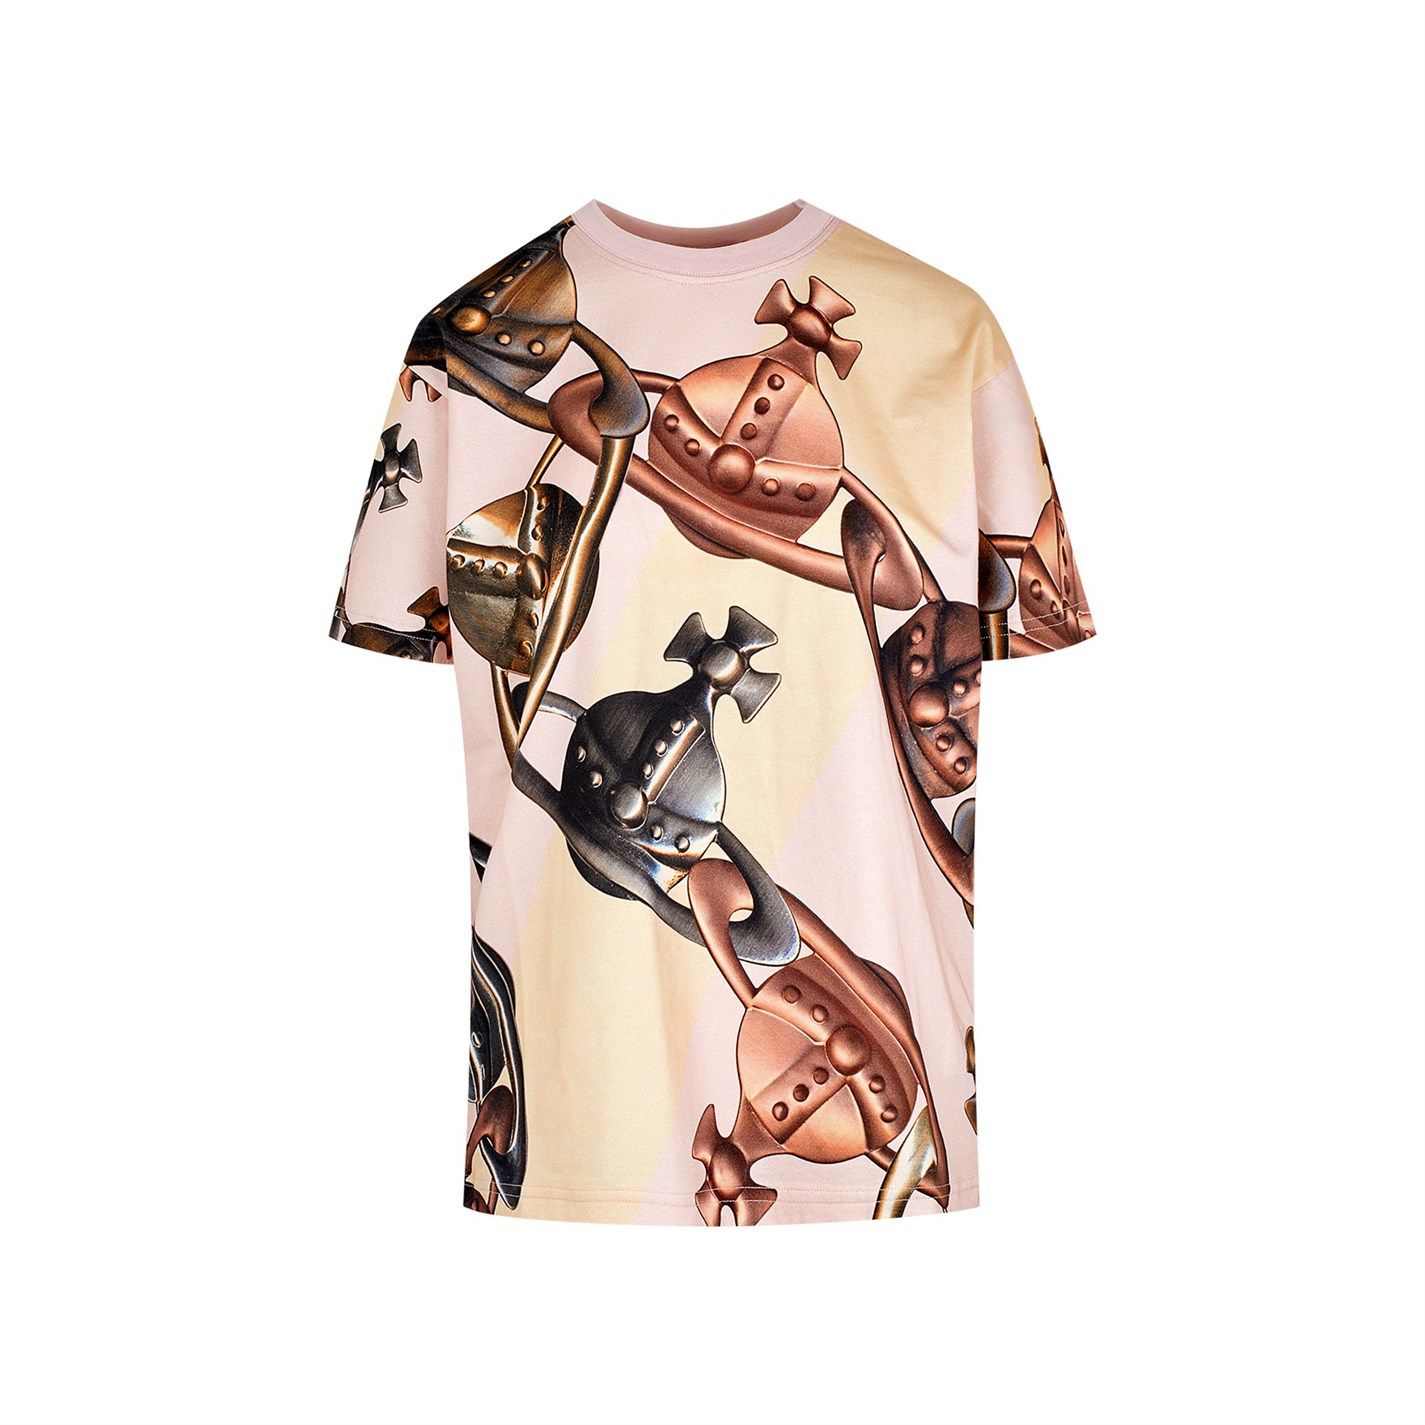 Vivienne Westwood Graphic Orb T-Shirt in Multi